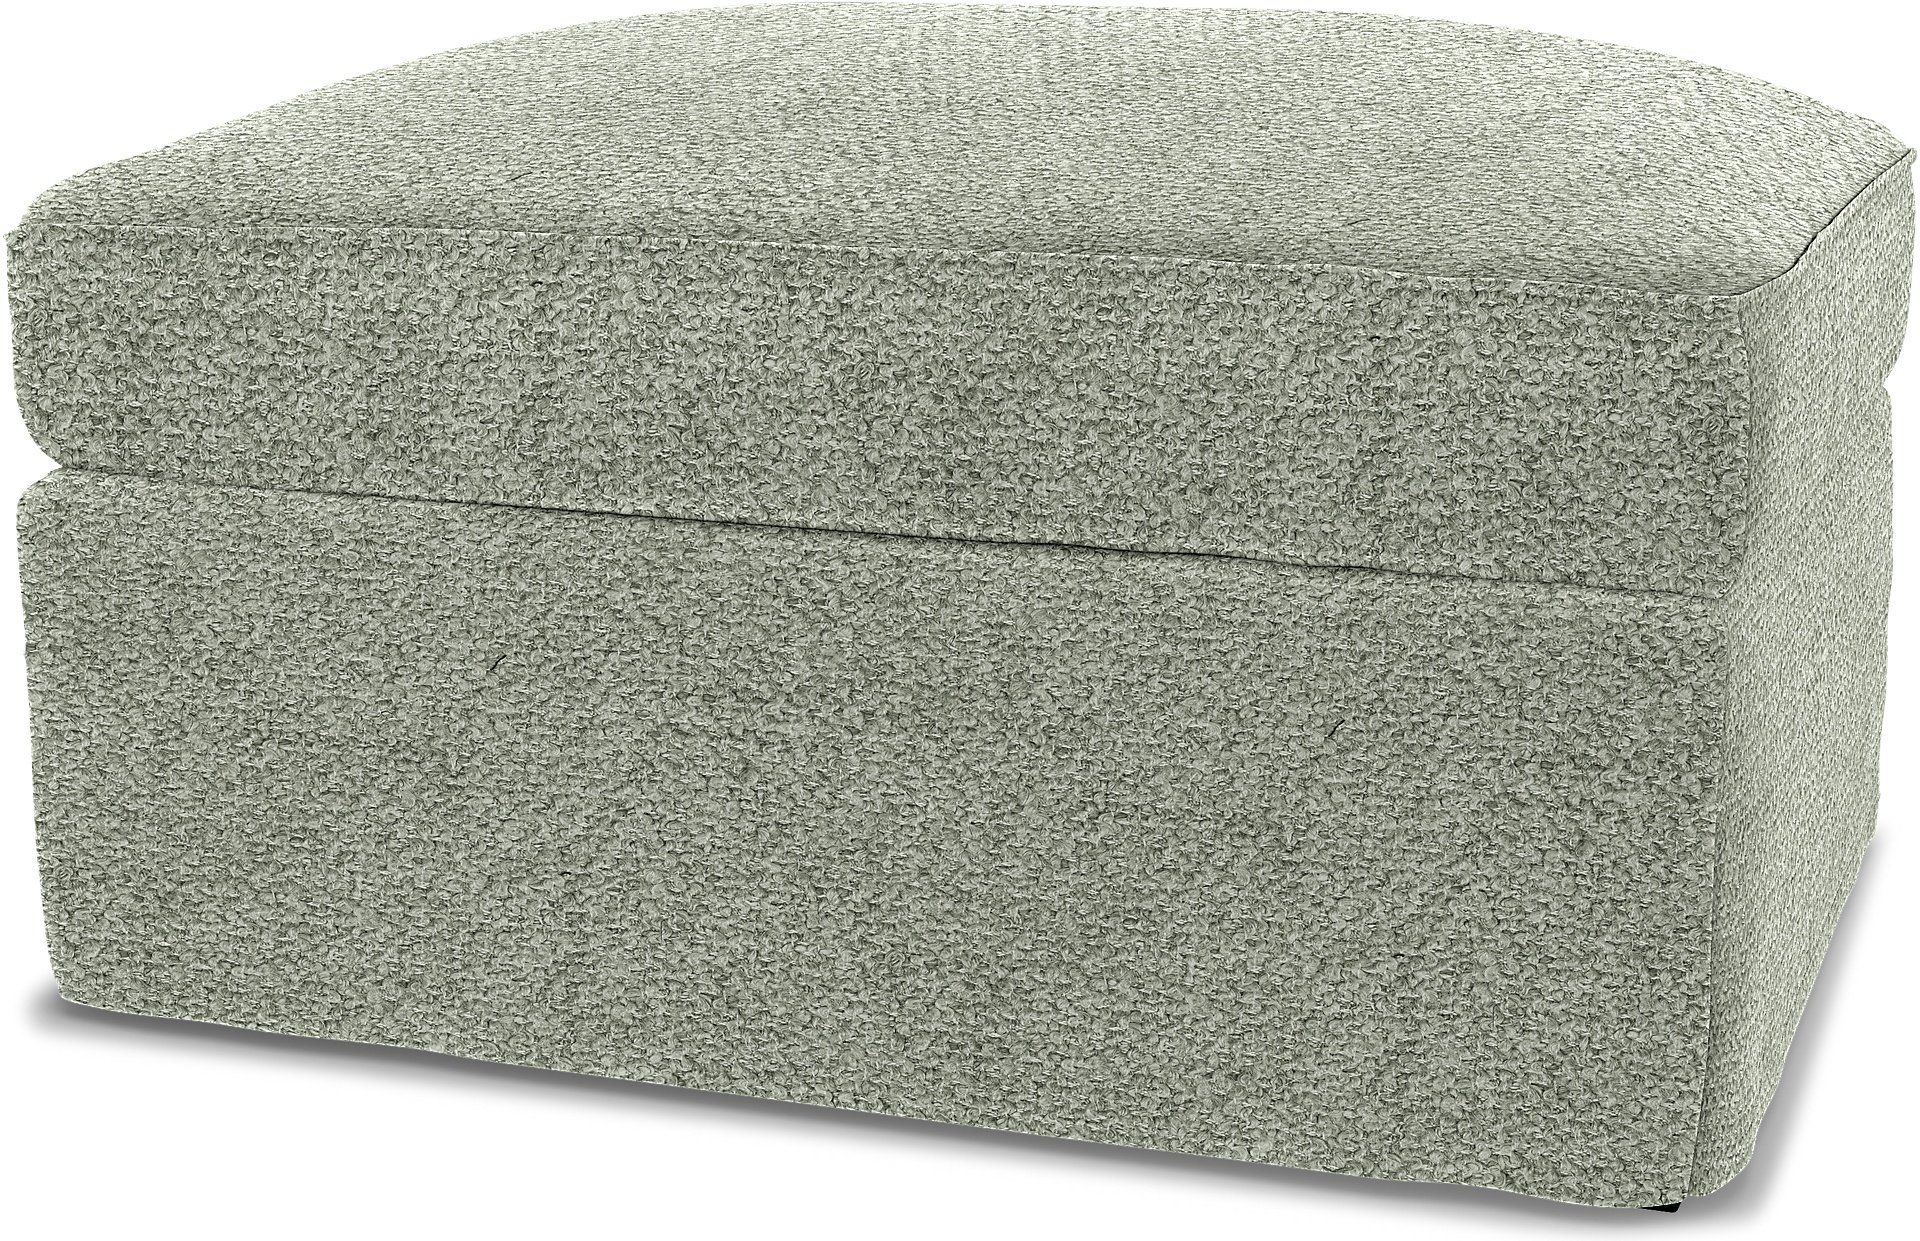 IKEA - Gronlid Footstool with Storage Cover, Pistachio, Boucle & Texture - Bemz